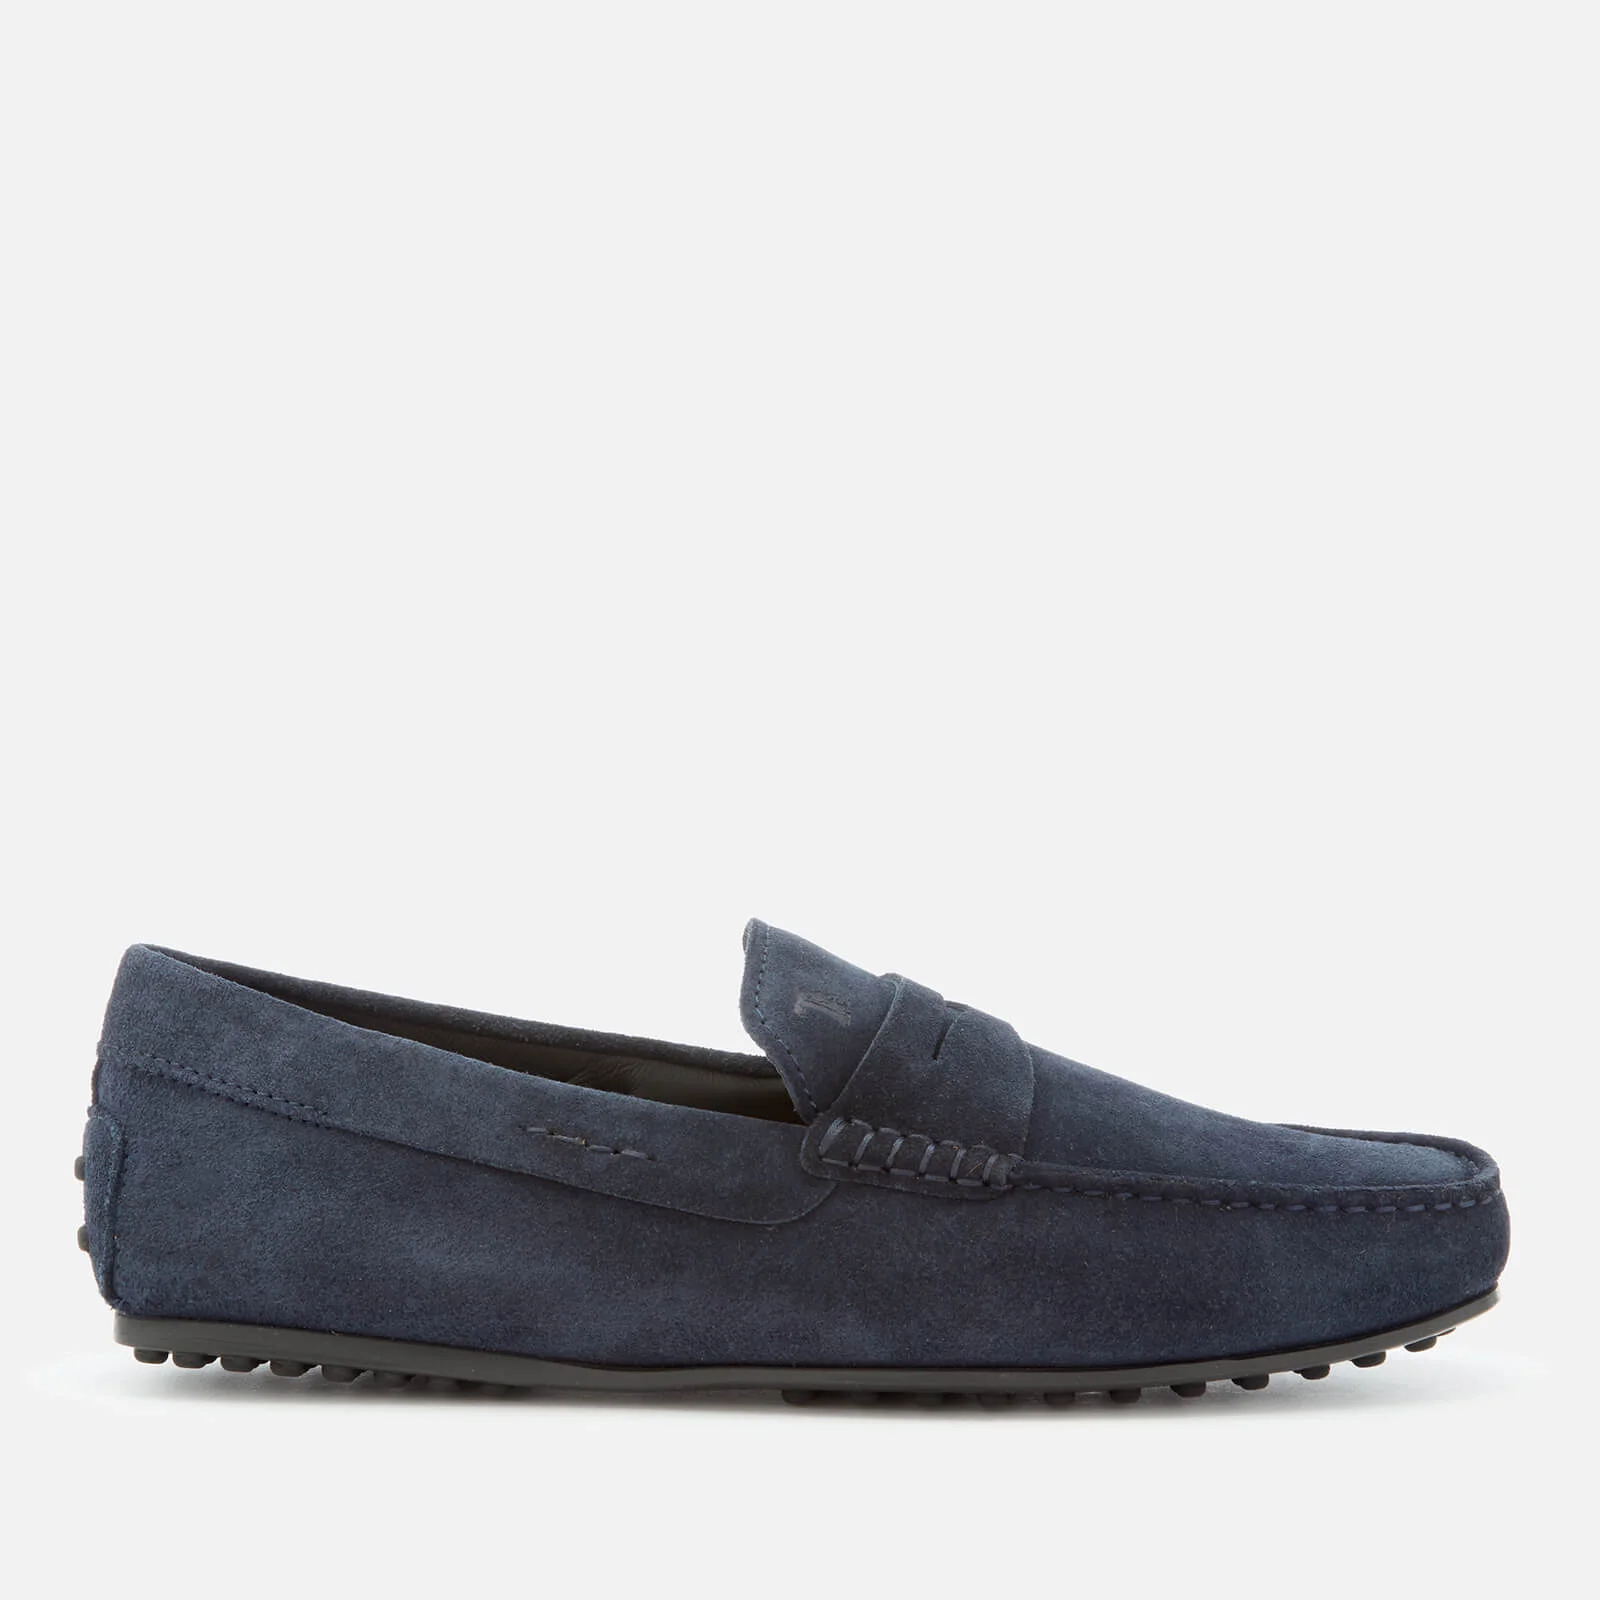 Tod's Men's Leather Driving Shoes - Navy Image 1